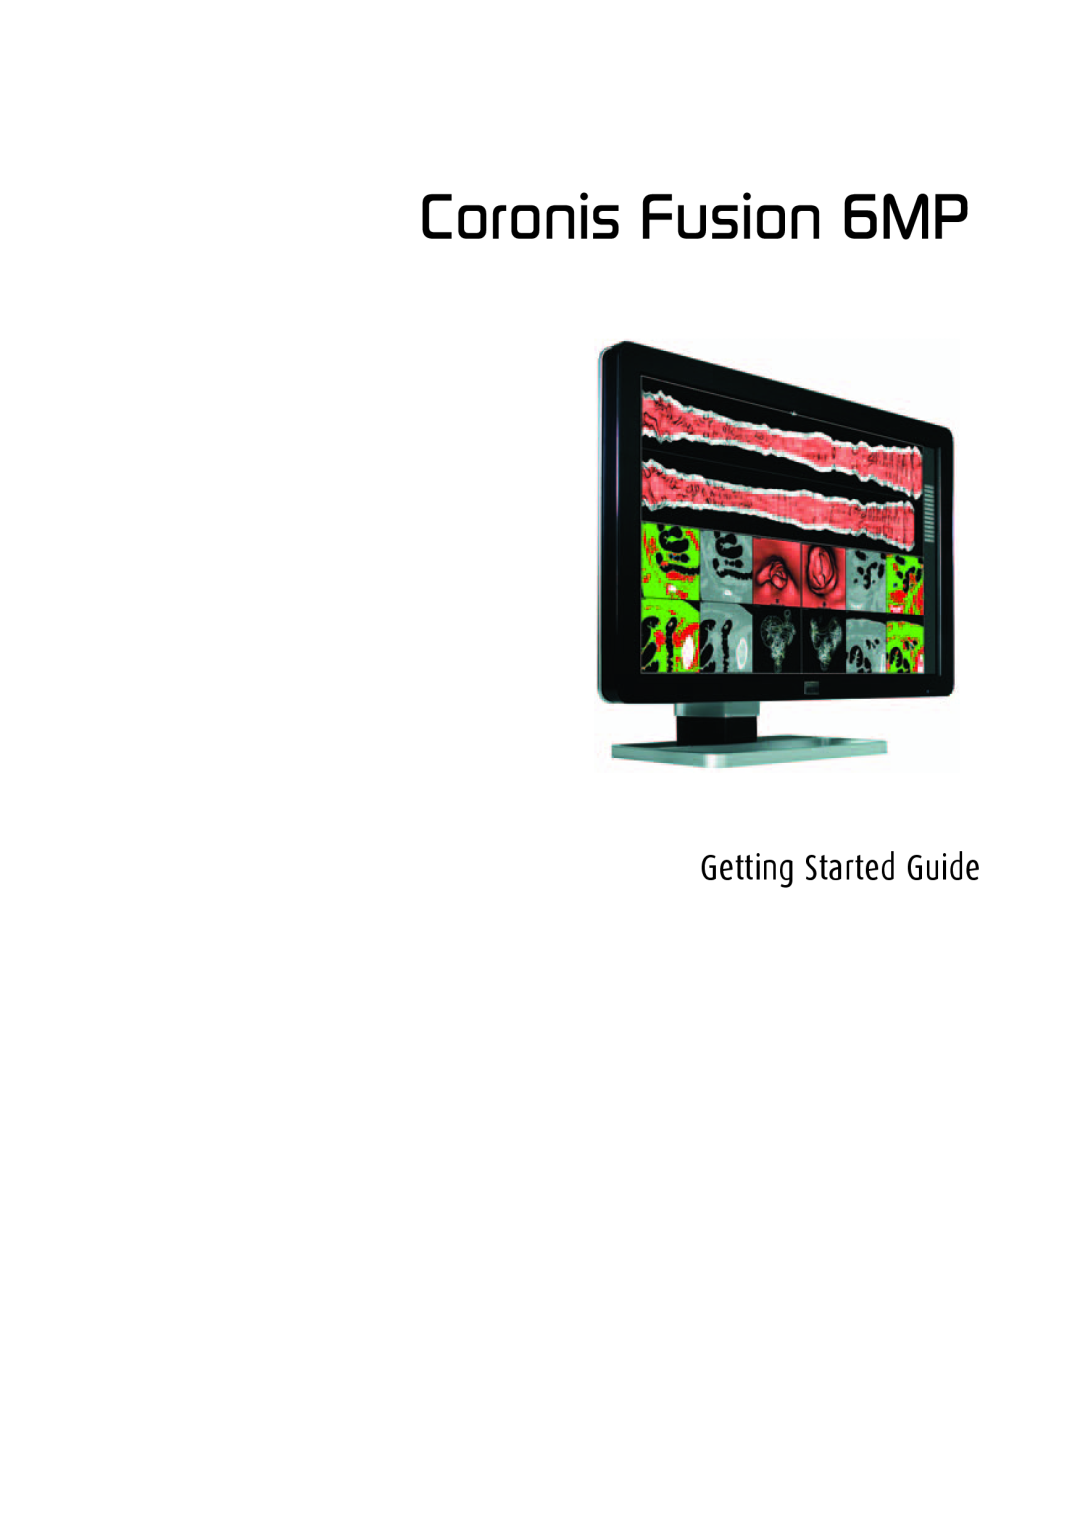 Barco MDCC 6130 manual Coronis Fusion 6MP, Getting Started Guide 